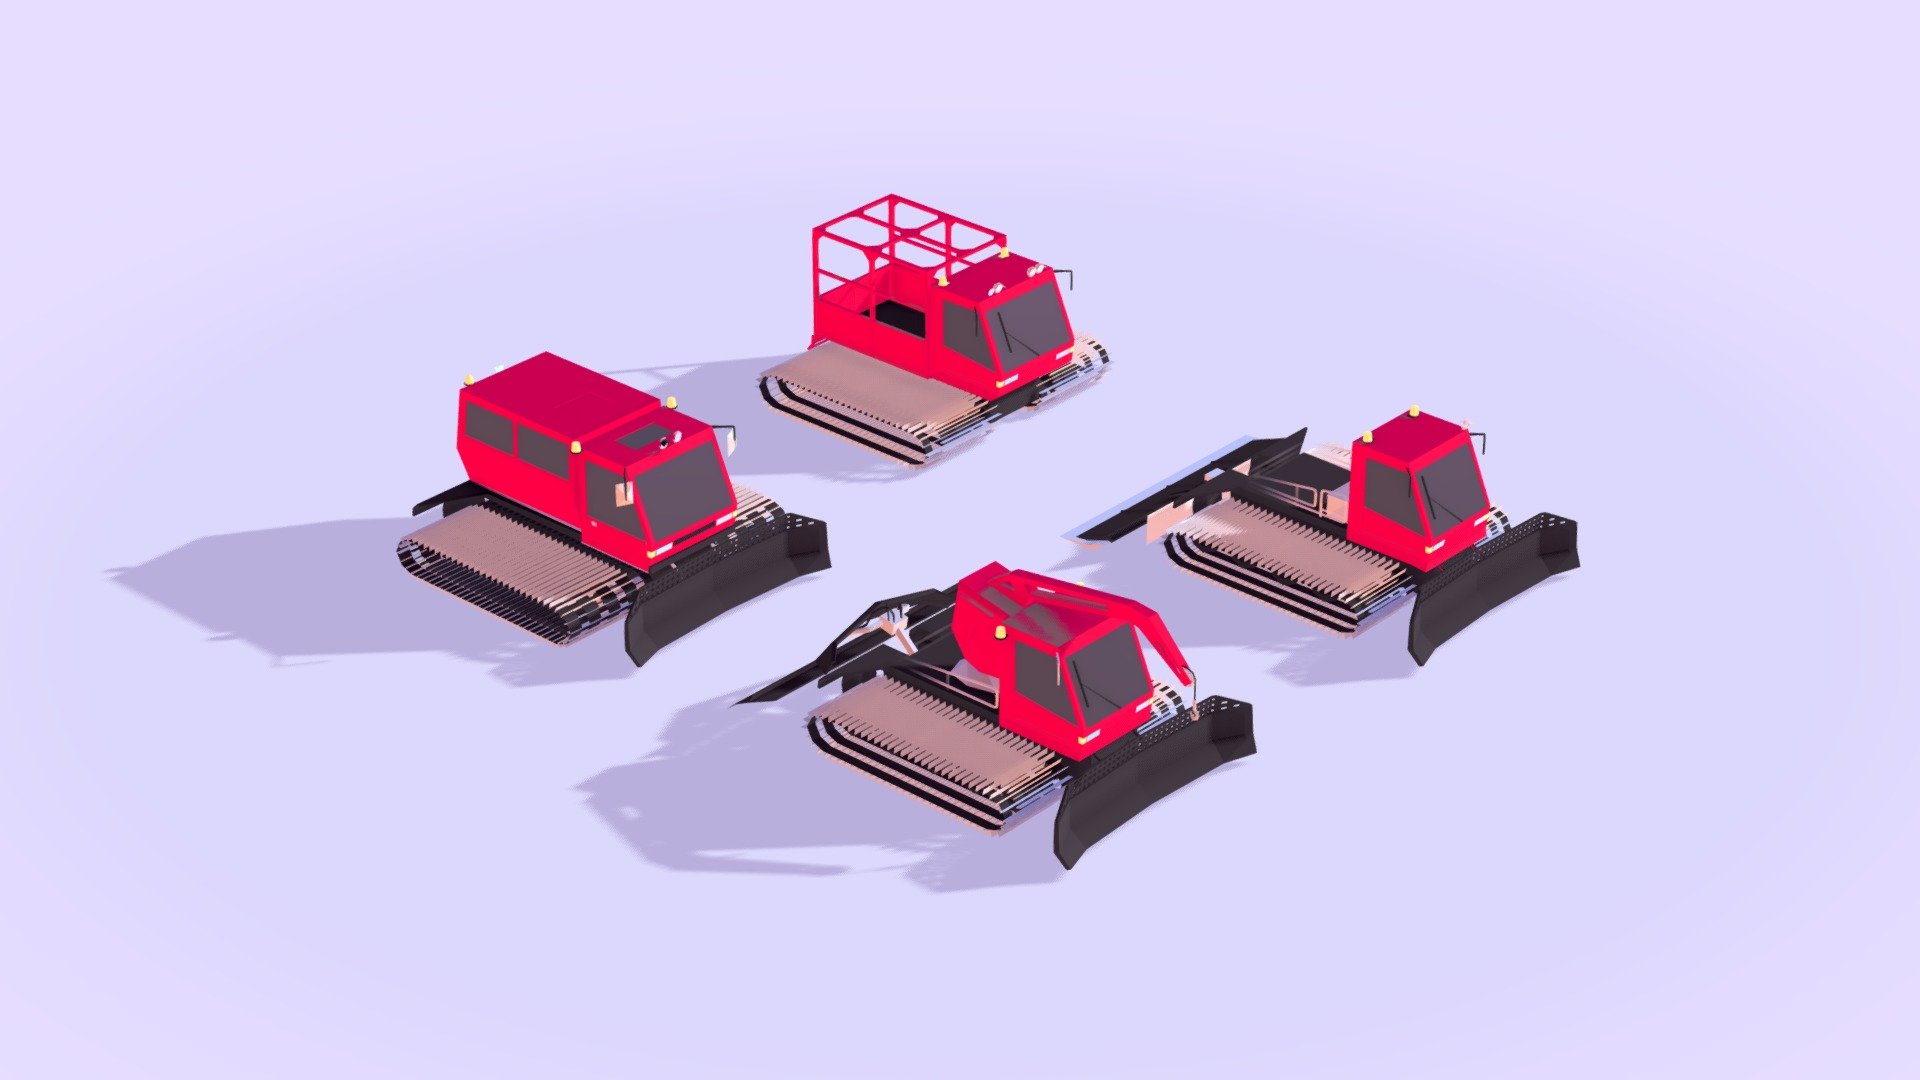 4 Cartoon Low Poly Snowcats Vehicles

Created on Cinema 4d R17 

17954 Polygons

Procedural Textured 

Game Ready
 - Cartoon Low Poly Snowcat Pack - Buy Royalty Free 3D model by antonmoek 3d model